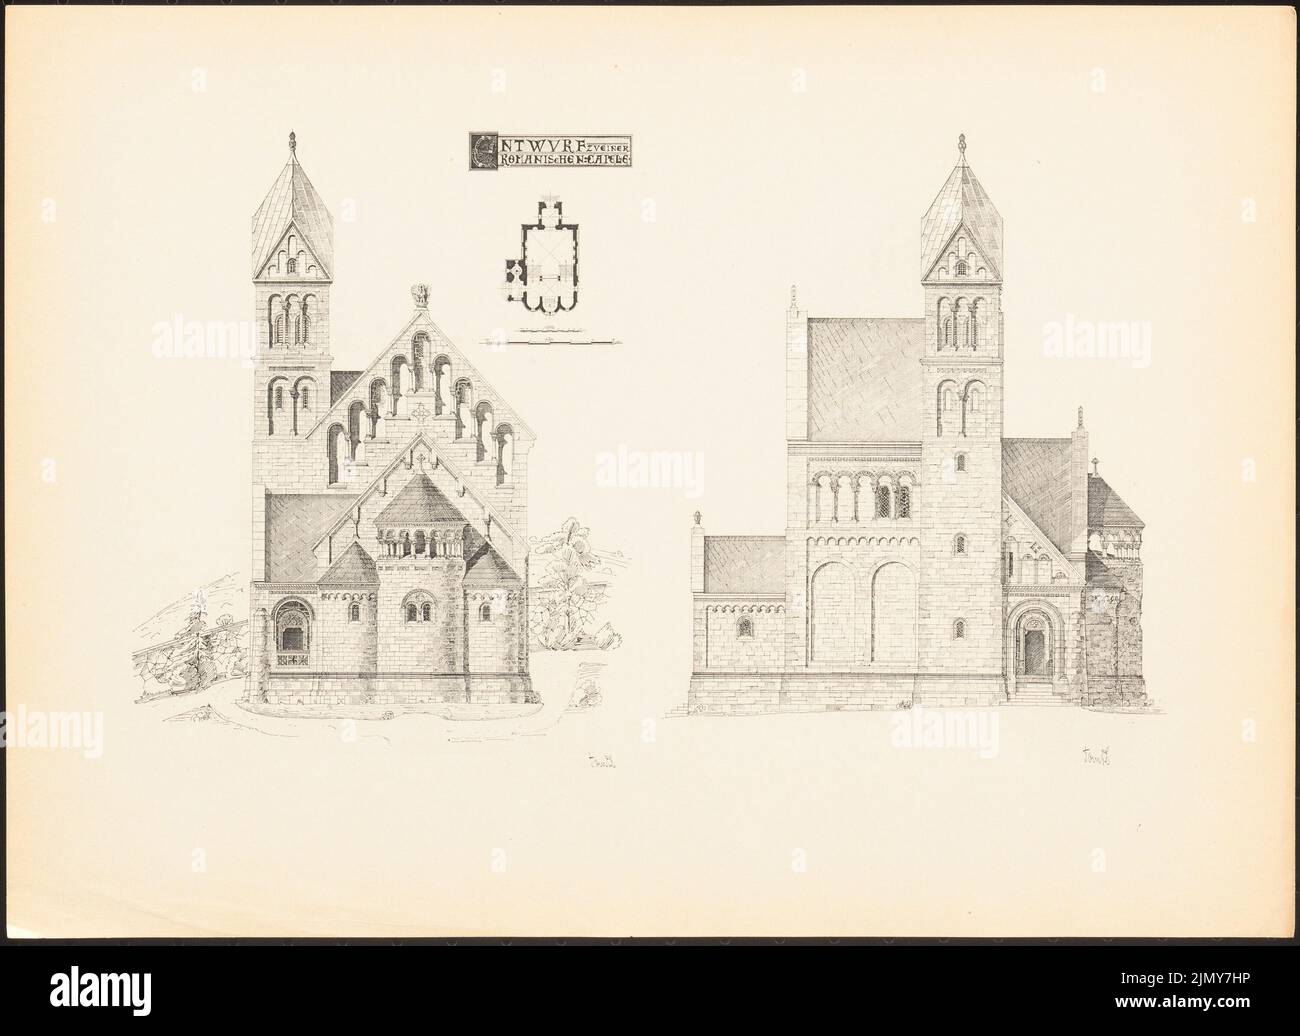 Taute, Romanesque chapel. (From: Prints of seminar works by the Royal Technical University of Berlin, Vol. I) (1890-1902): floor plan, view, side view. Pressure on paper, 24.2 x 33.3 cm (including scan edges) Stock Photo